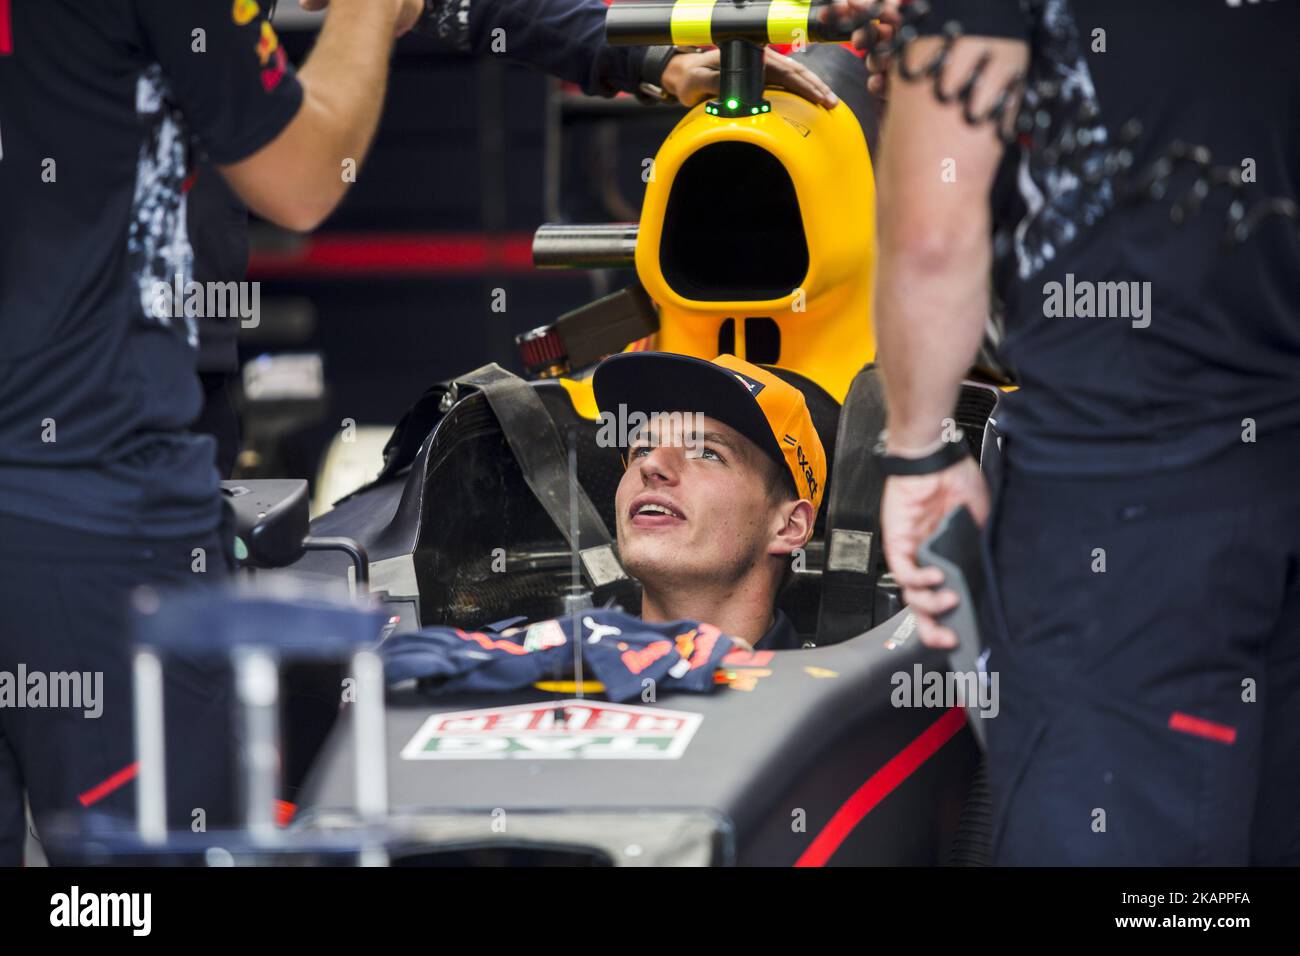 33 VERSTAPPEN Max from Nederlans of Red Bull Tag Heuer inside his car talking to his mechanics during the Formula One Belgian Grand Prix at Circuit de Spa-Francorchamps on August 24, 2017 in Spa, Belgium. (Photo by Xavier Bonilla/NurPhoto) Stock Photo